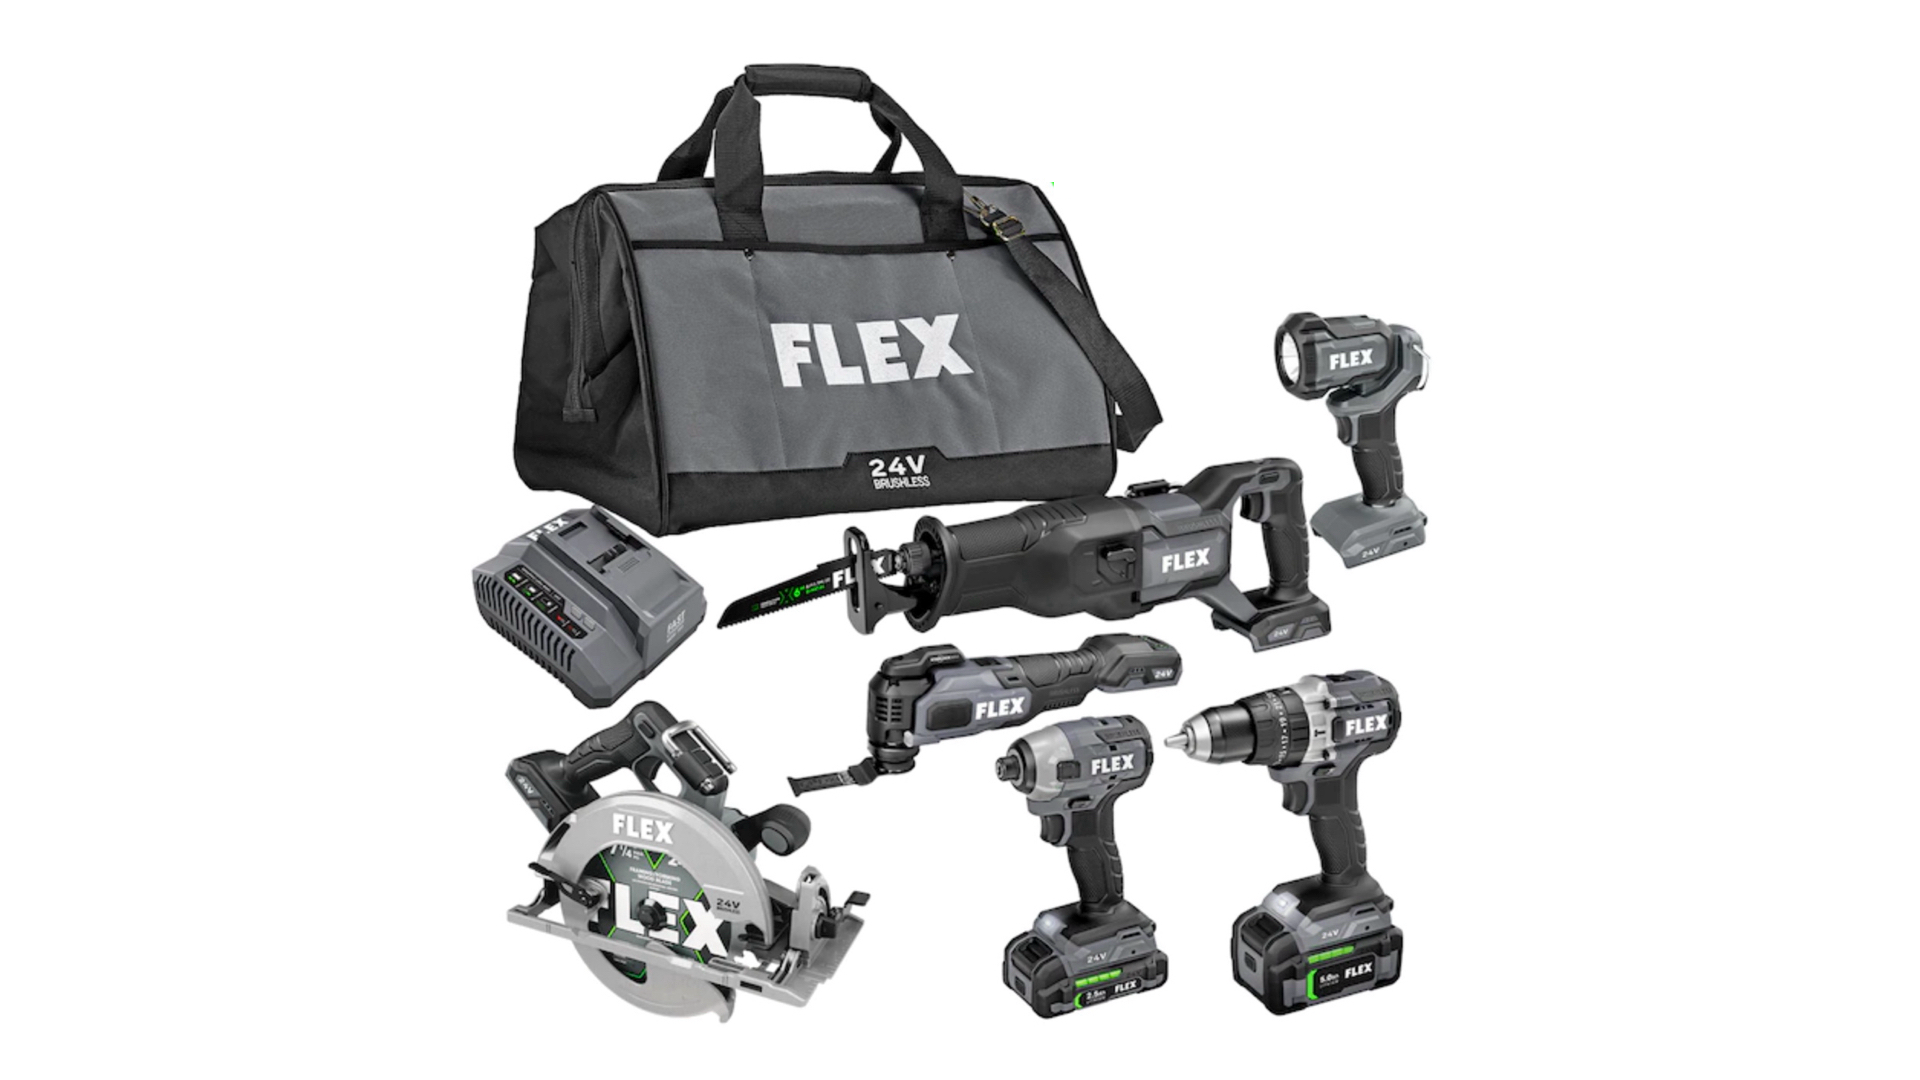 FLEX six tool set, battery, and charger.